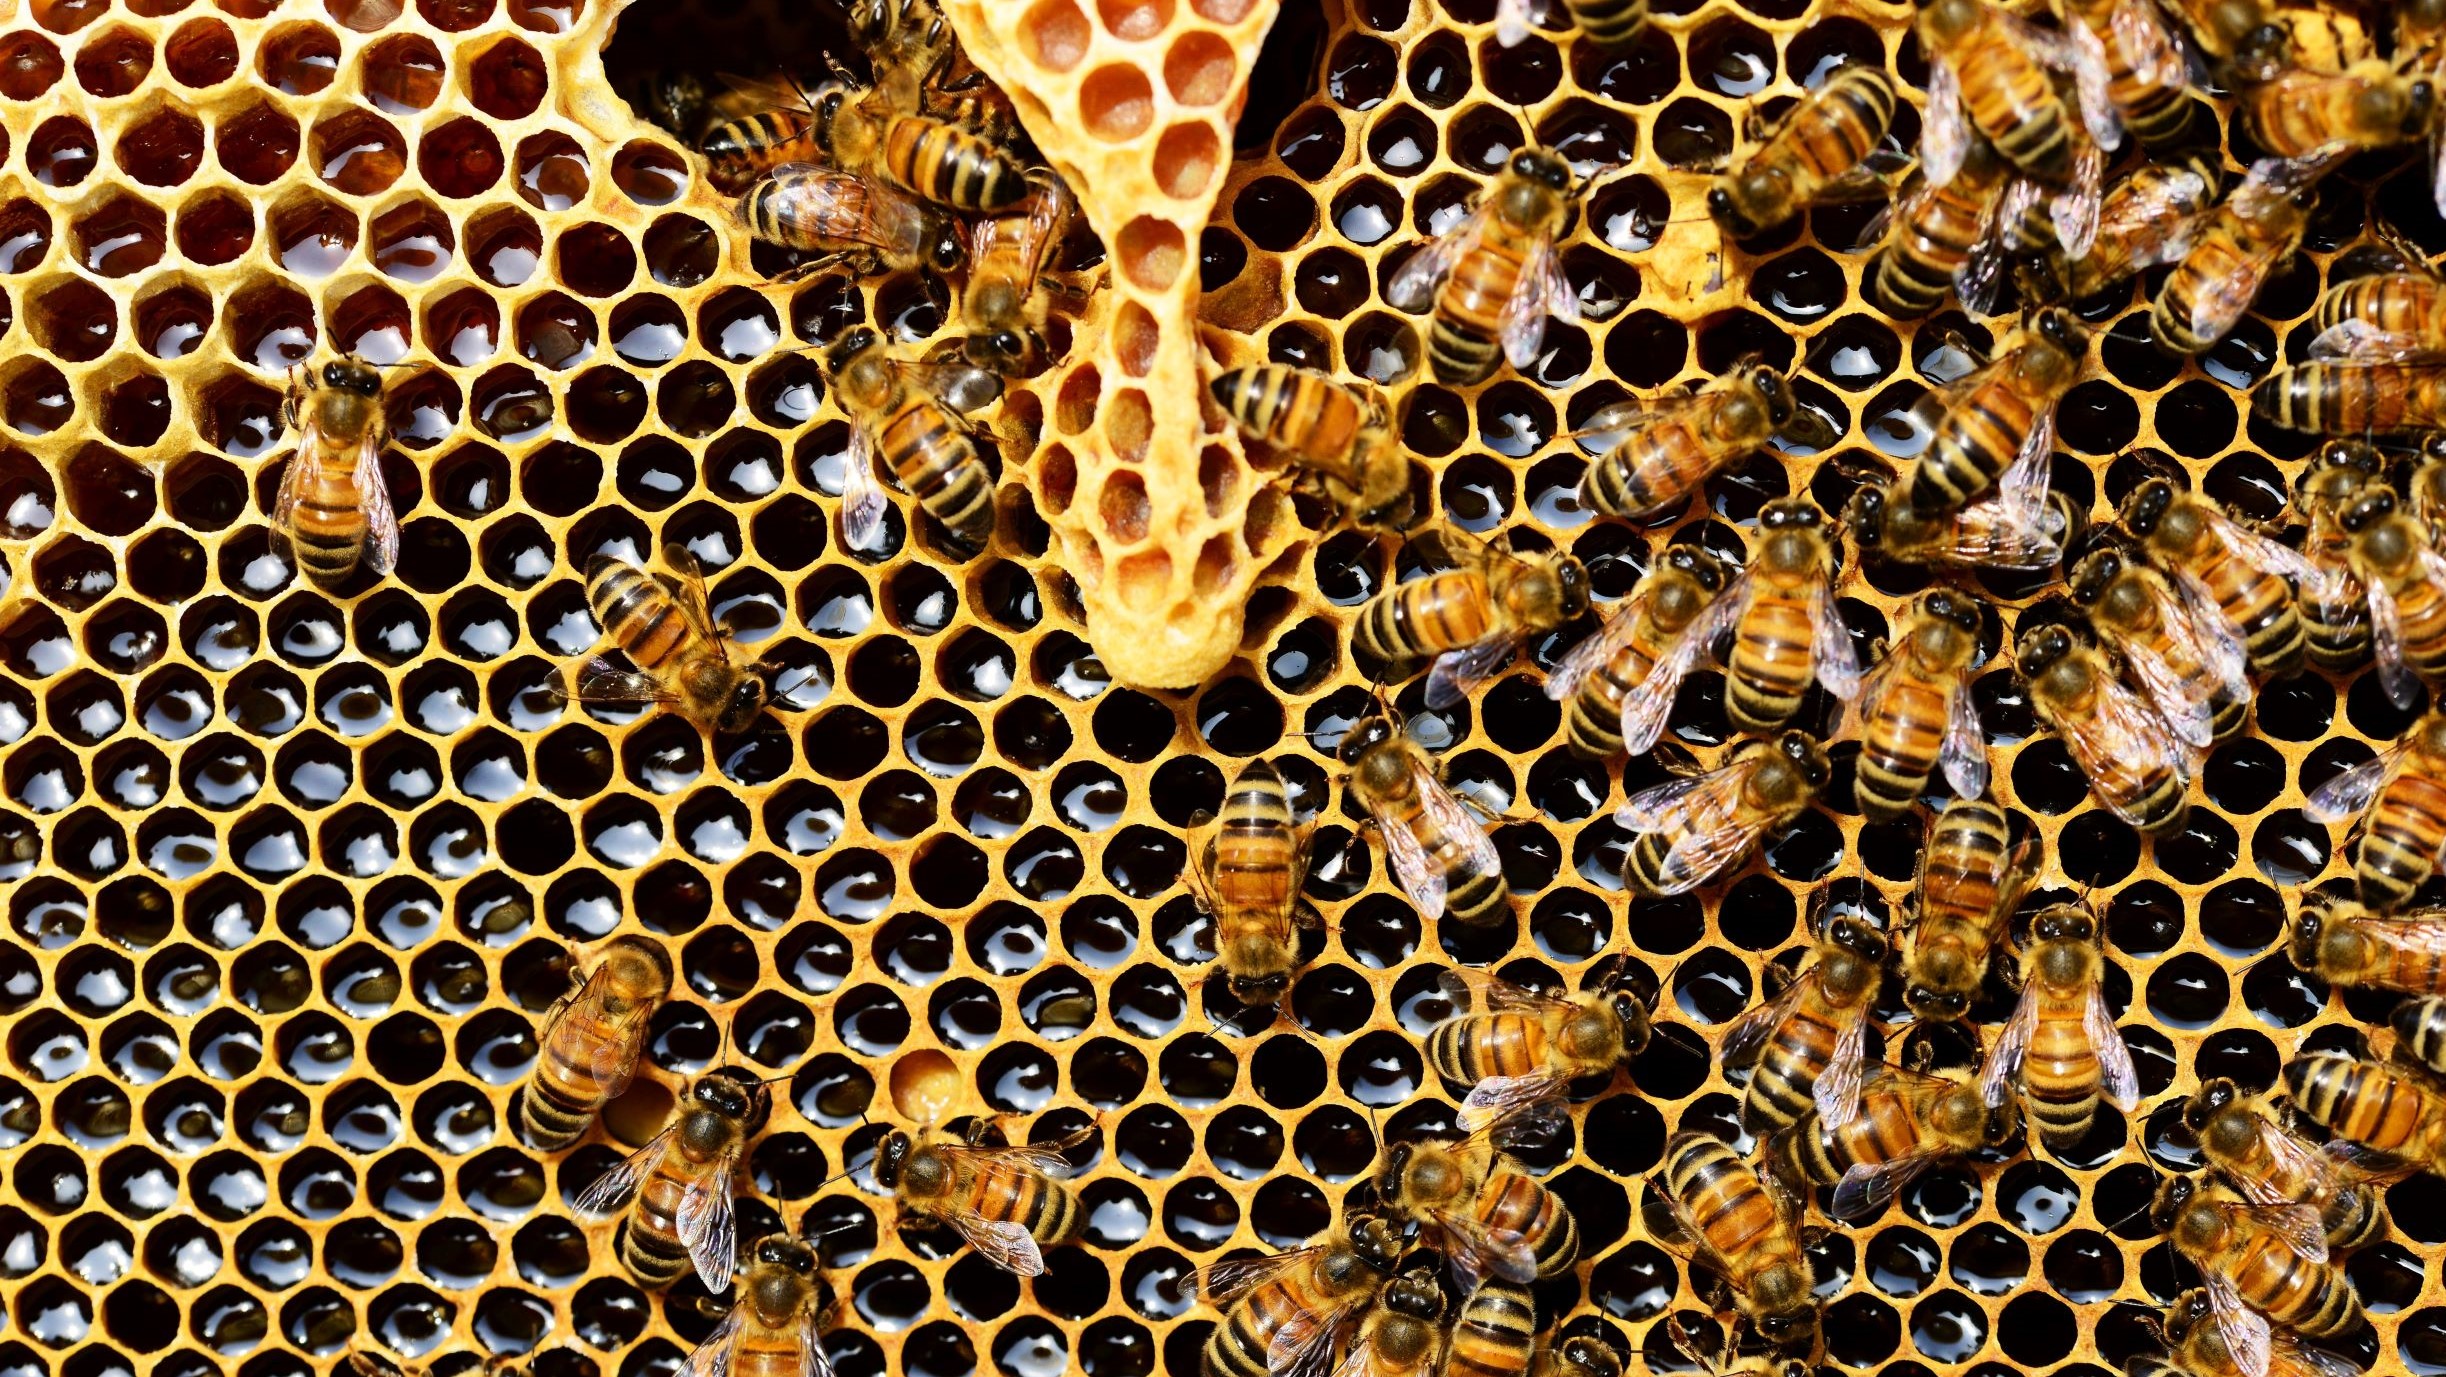 Bees gathering in honeycomb